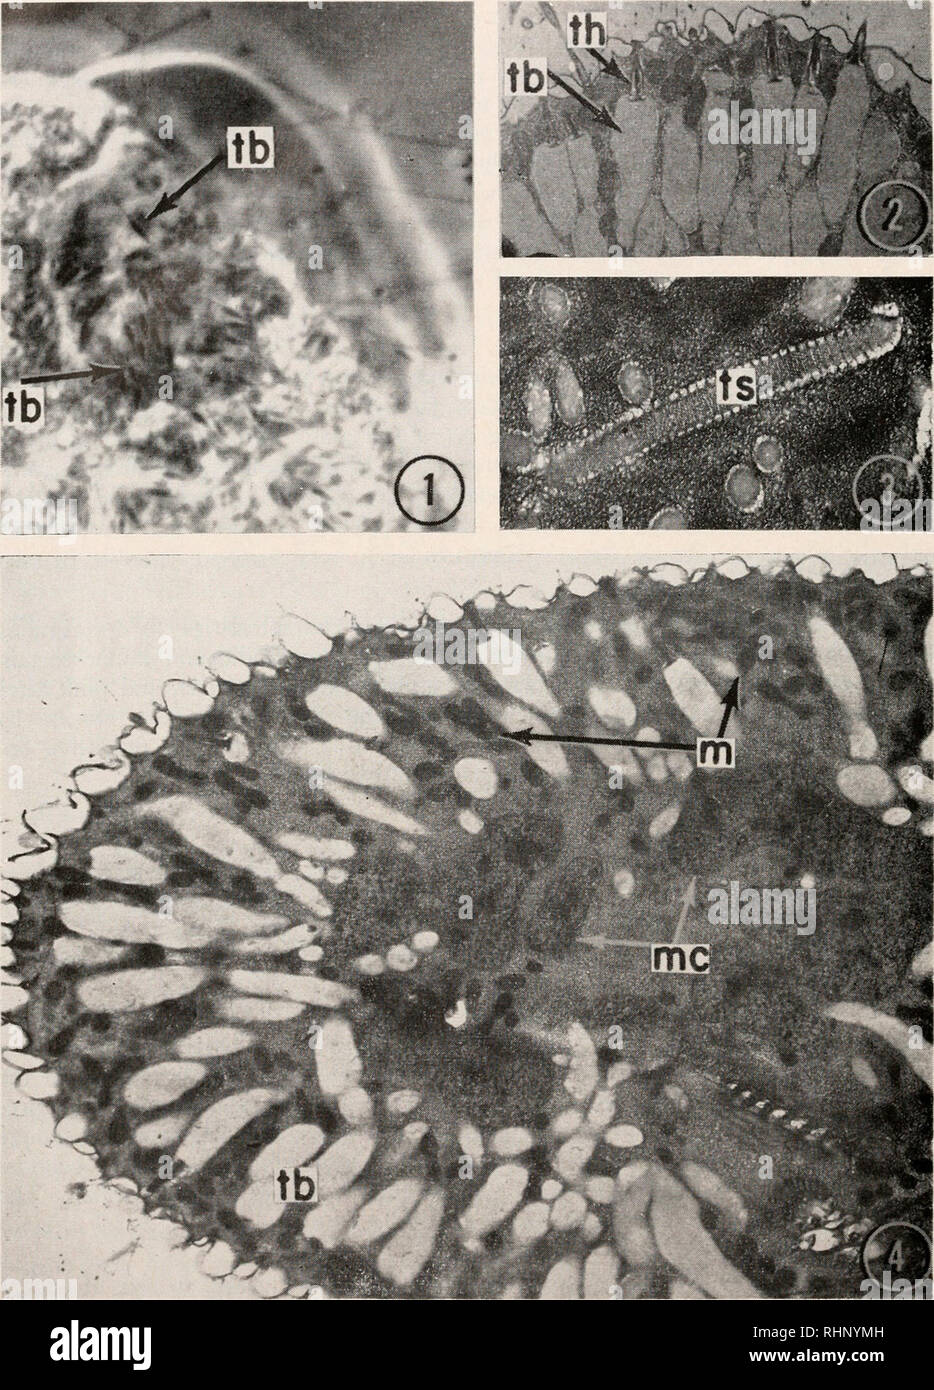 . The Biological bulletin. Biology; Zoology; Biology; Marine Biology. 184 E. L. POWERS, C. F. EHRET AND L. E. ROTH *. FIGURE 1. Phase contrast photograph of surface of compressed specimen of P. aitrclia showing size of body of trichocyst relative to head in living condition. 1000 X. in, mitochondrion ; me, macronucleus ; mem, macronuclear membrane ; mt, mitochondria! tubule; n, nucleolus; p, pore of mitochondrial tubule; pi, pellicle; pt, plastic; s, peritubular space; tb, trichocyst body; tc, trichocyst cap; th, trichocyst head; ts, trichocyst shaft (&quot;exploded&quot;).. Please note that t Stock Photo